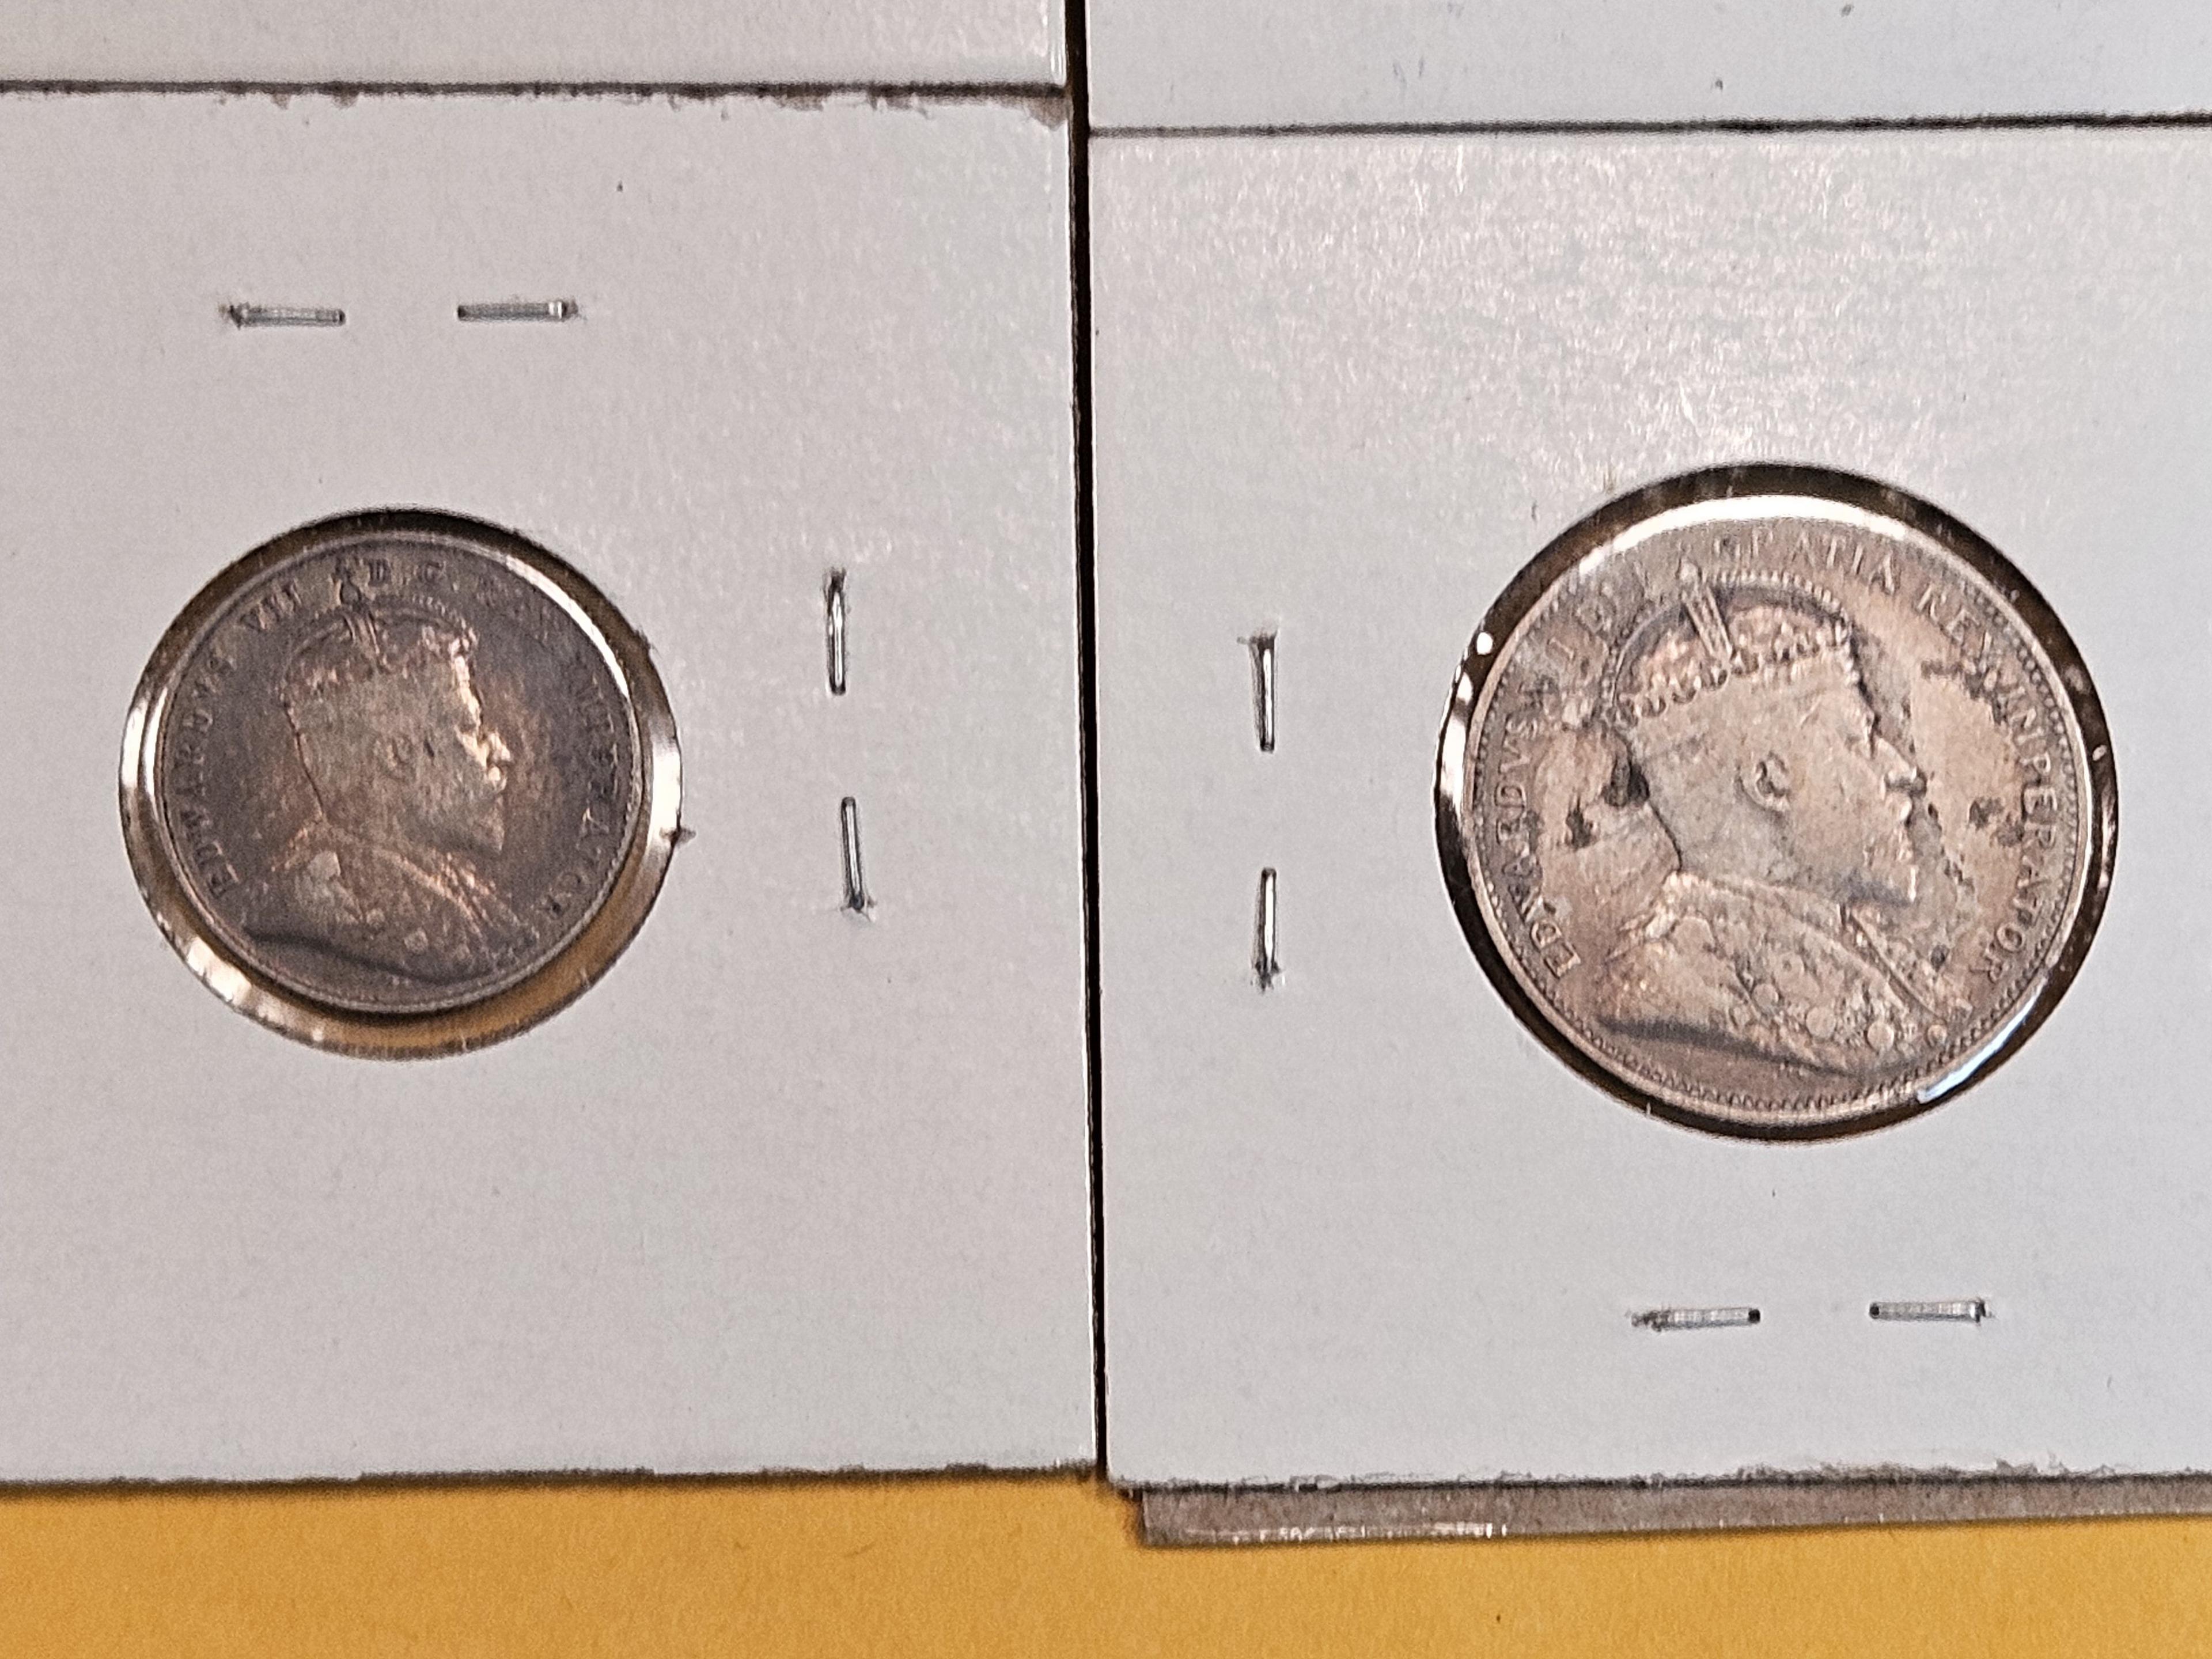 Four fantastic silver Canadian coins